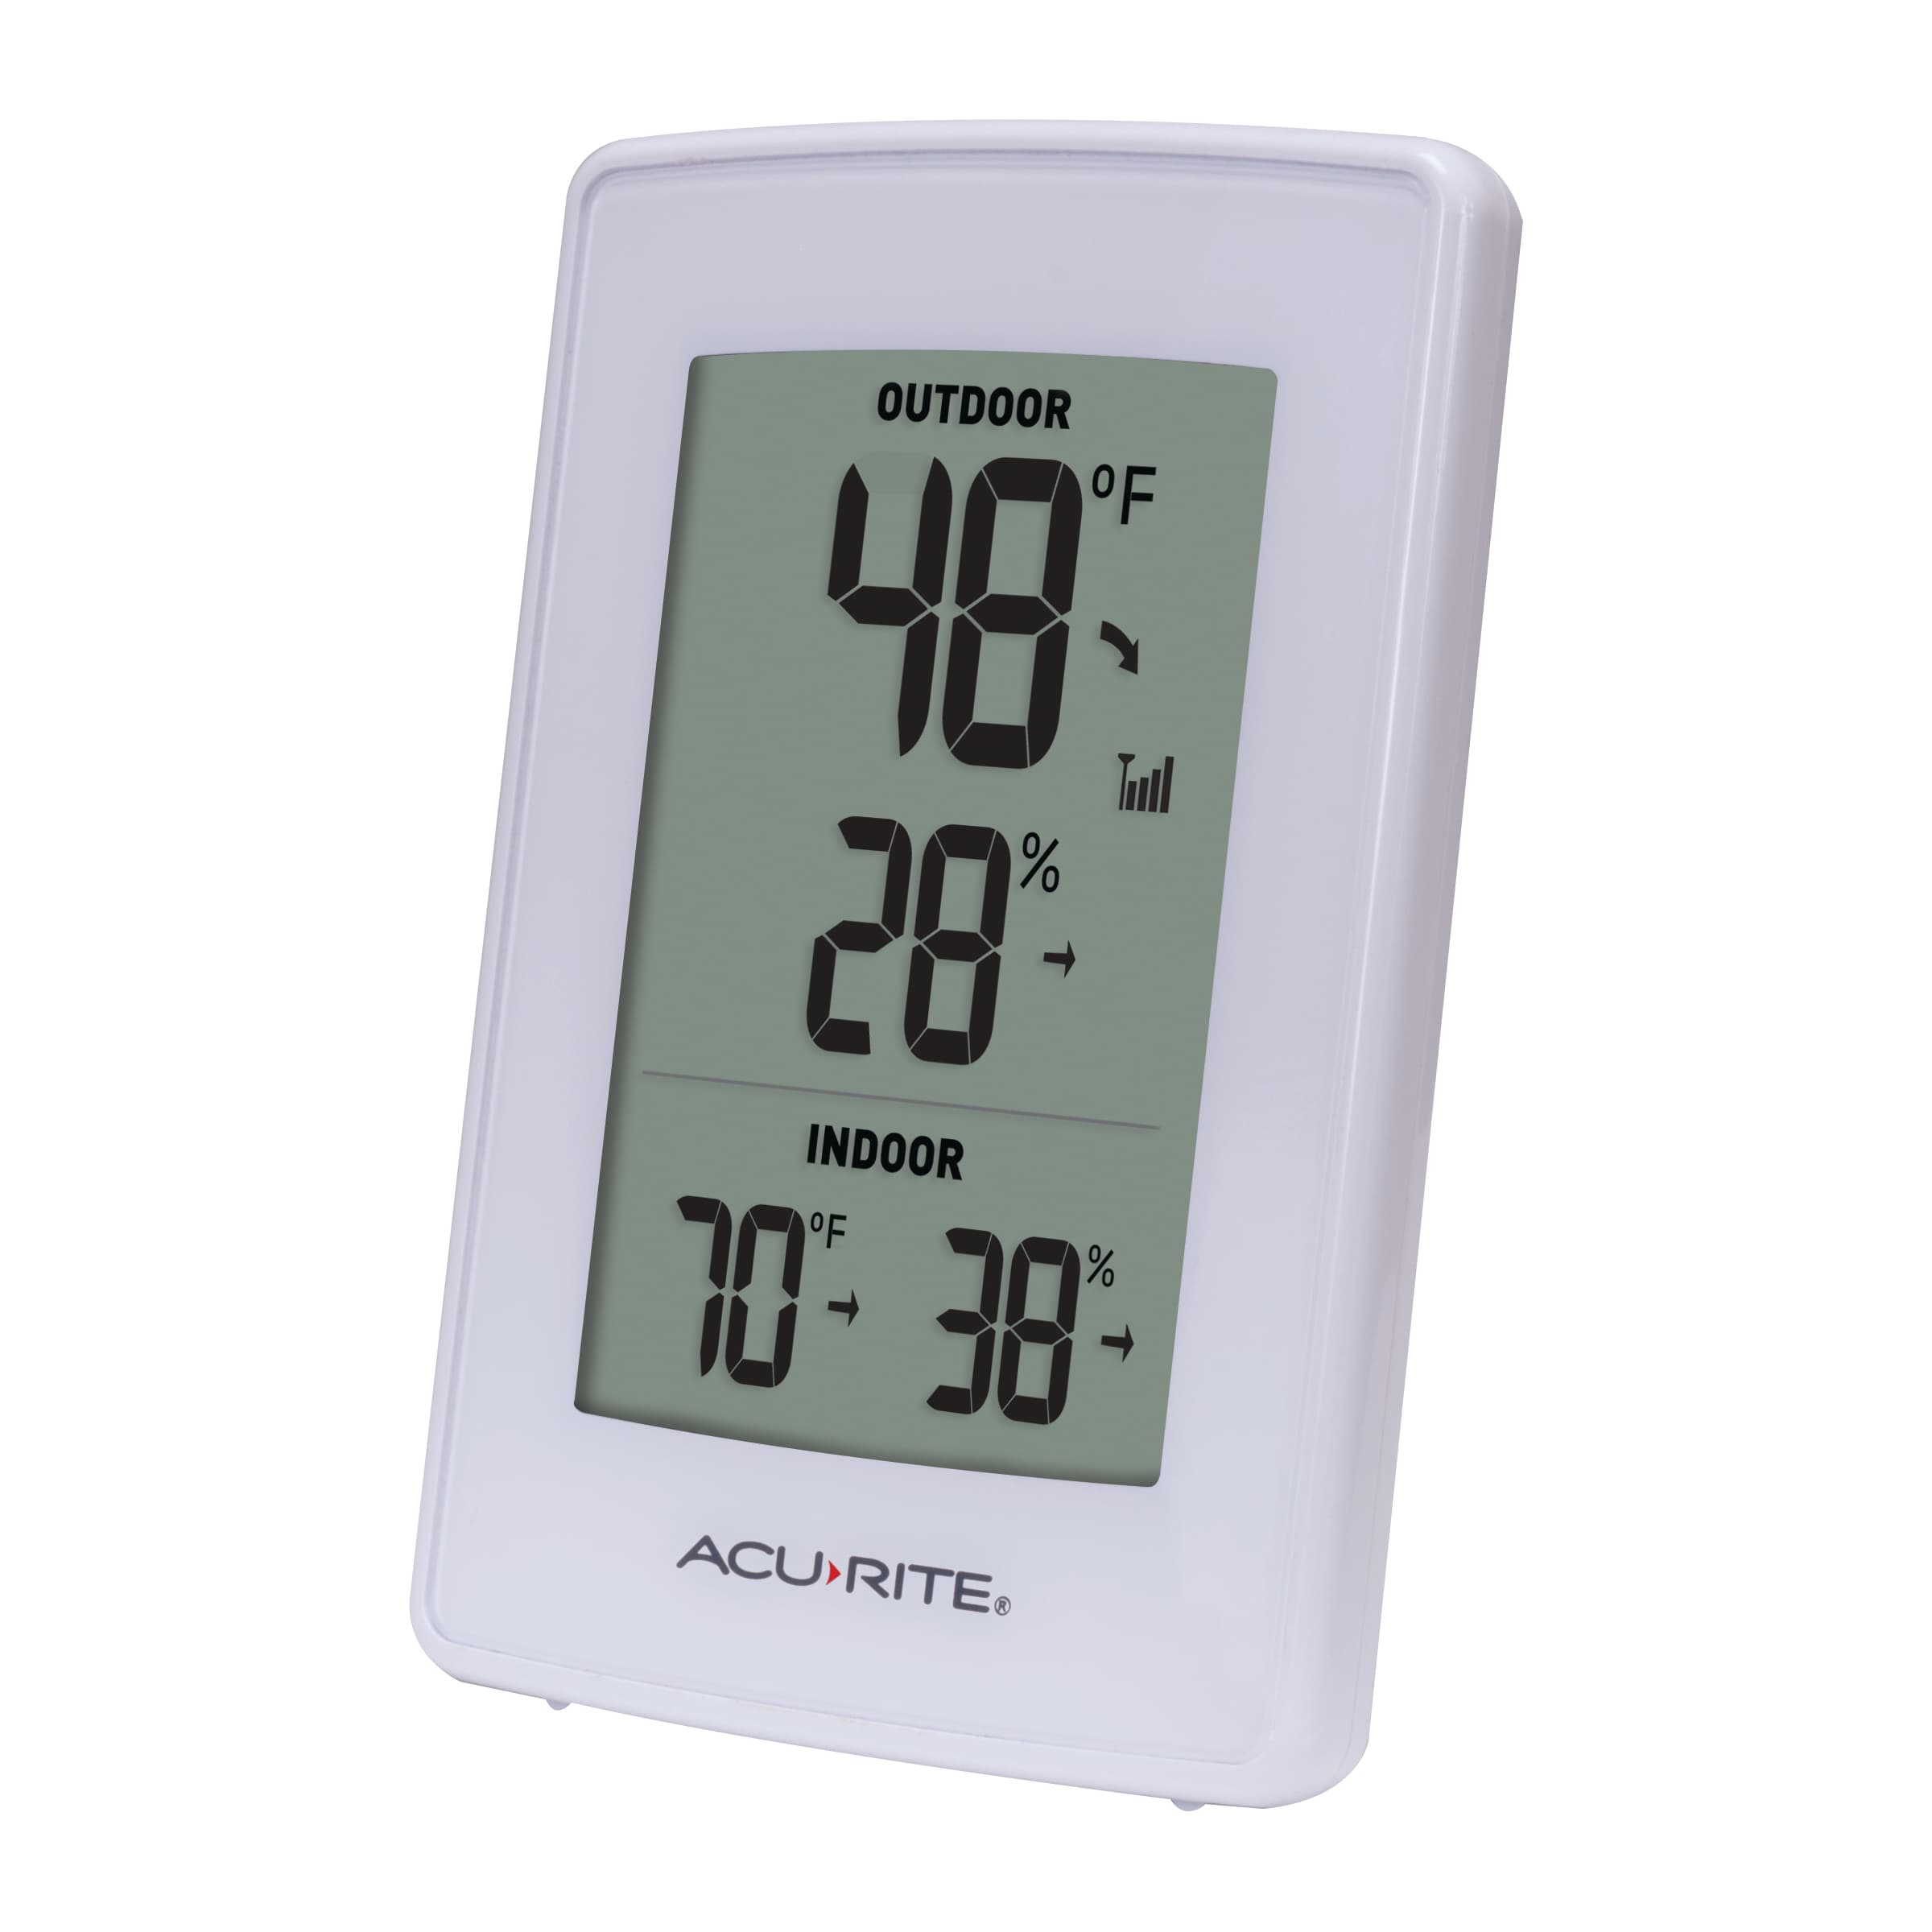 Clock Acurite Wireless Indoor Outdoor Thermometer Sensor NEW with LCD display 